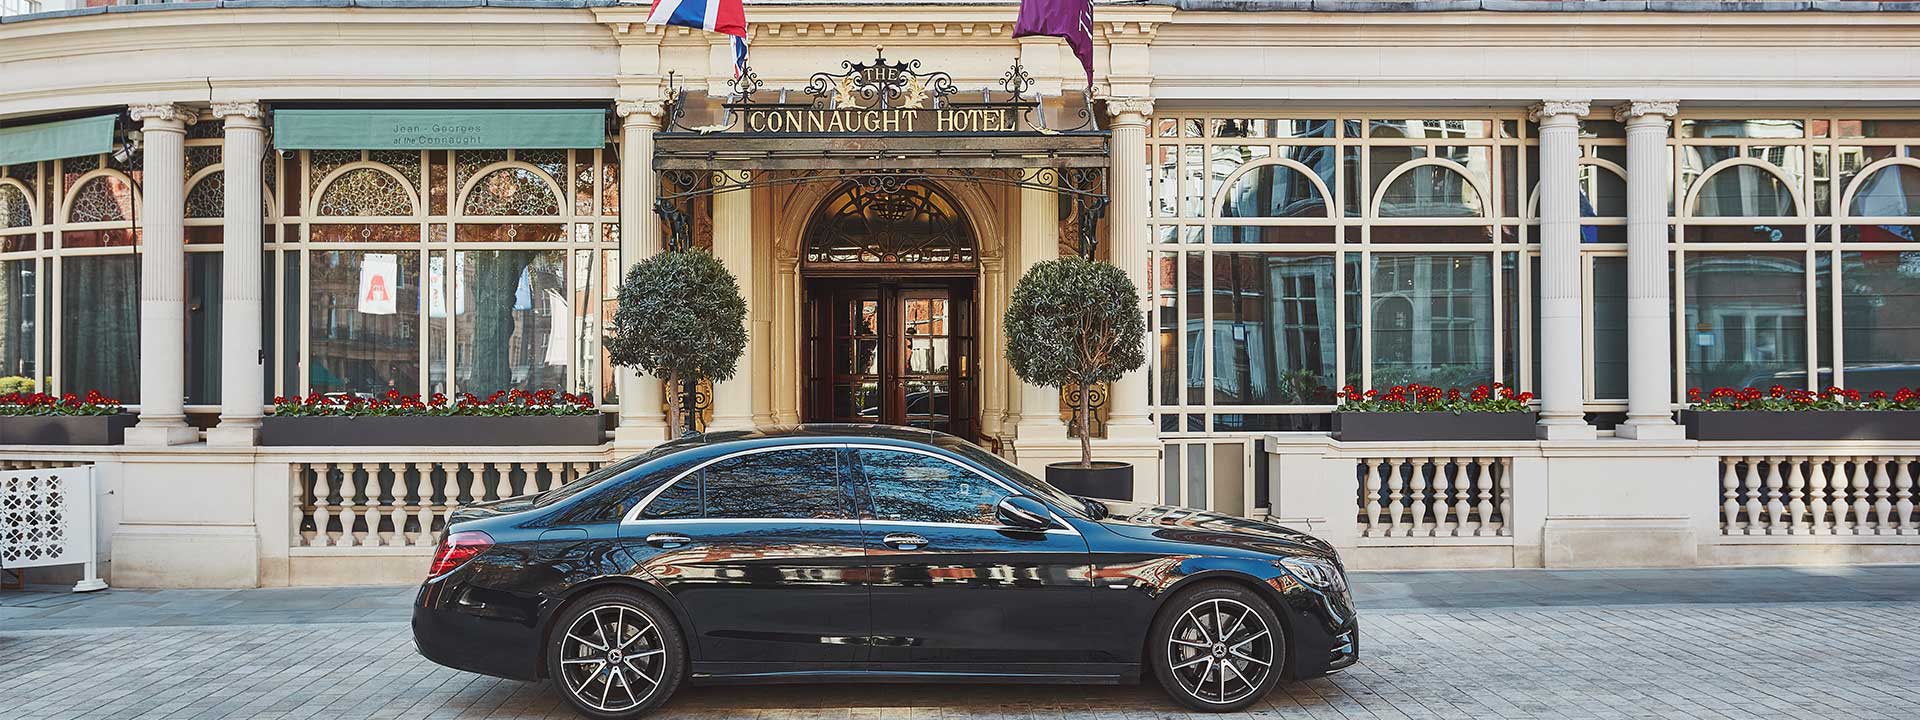 A black car near the entrance of The Connaught hotel.